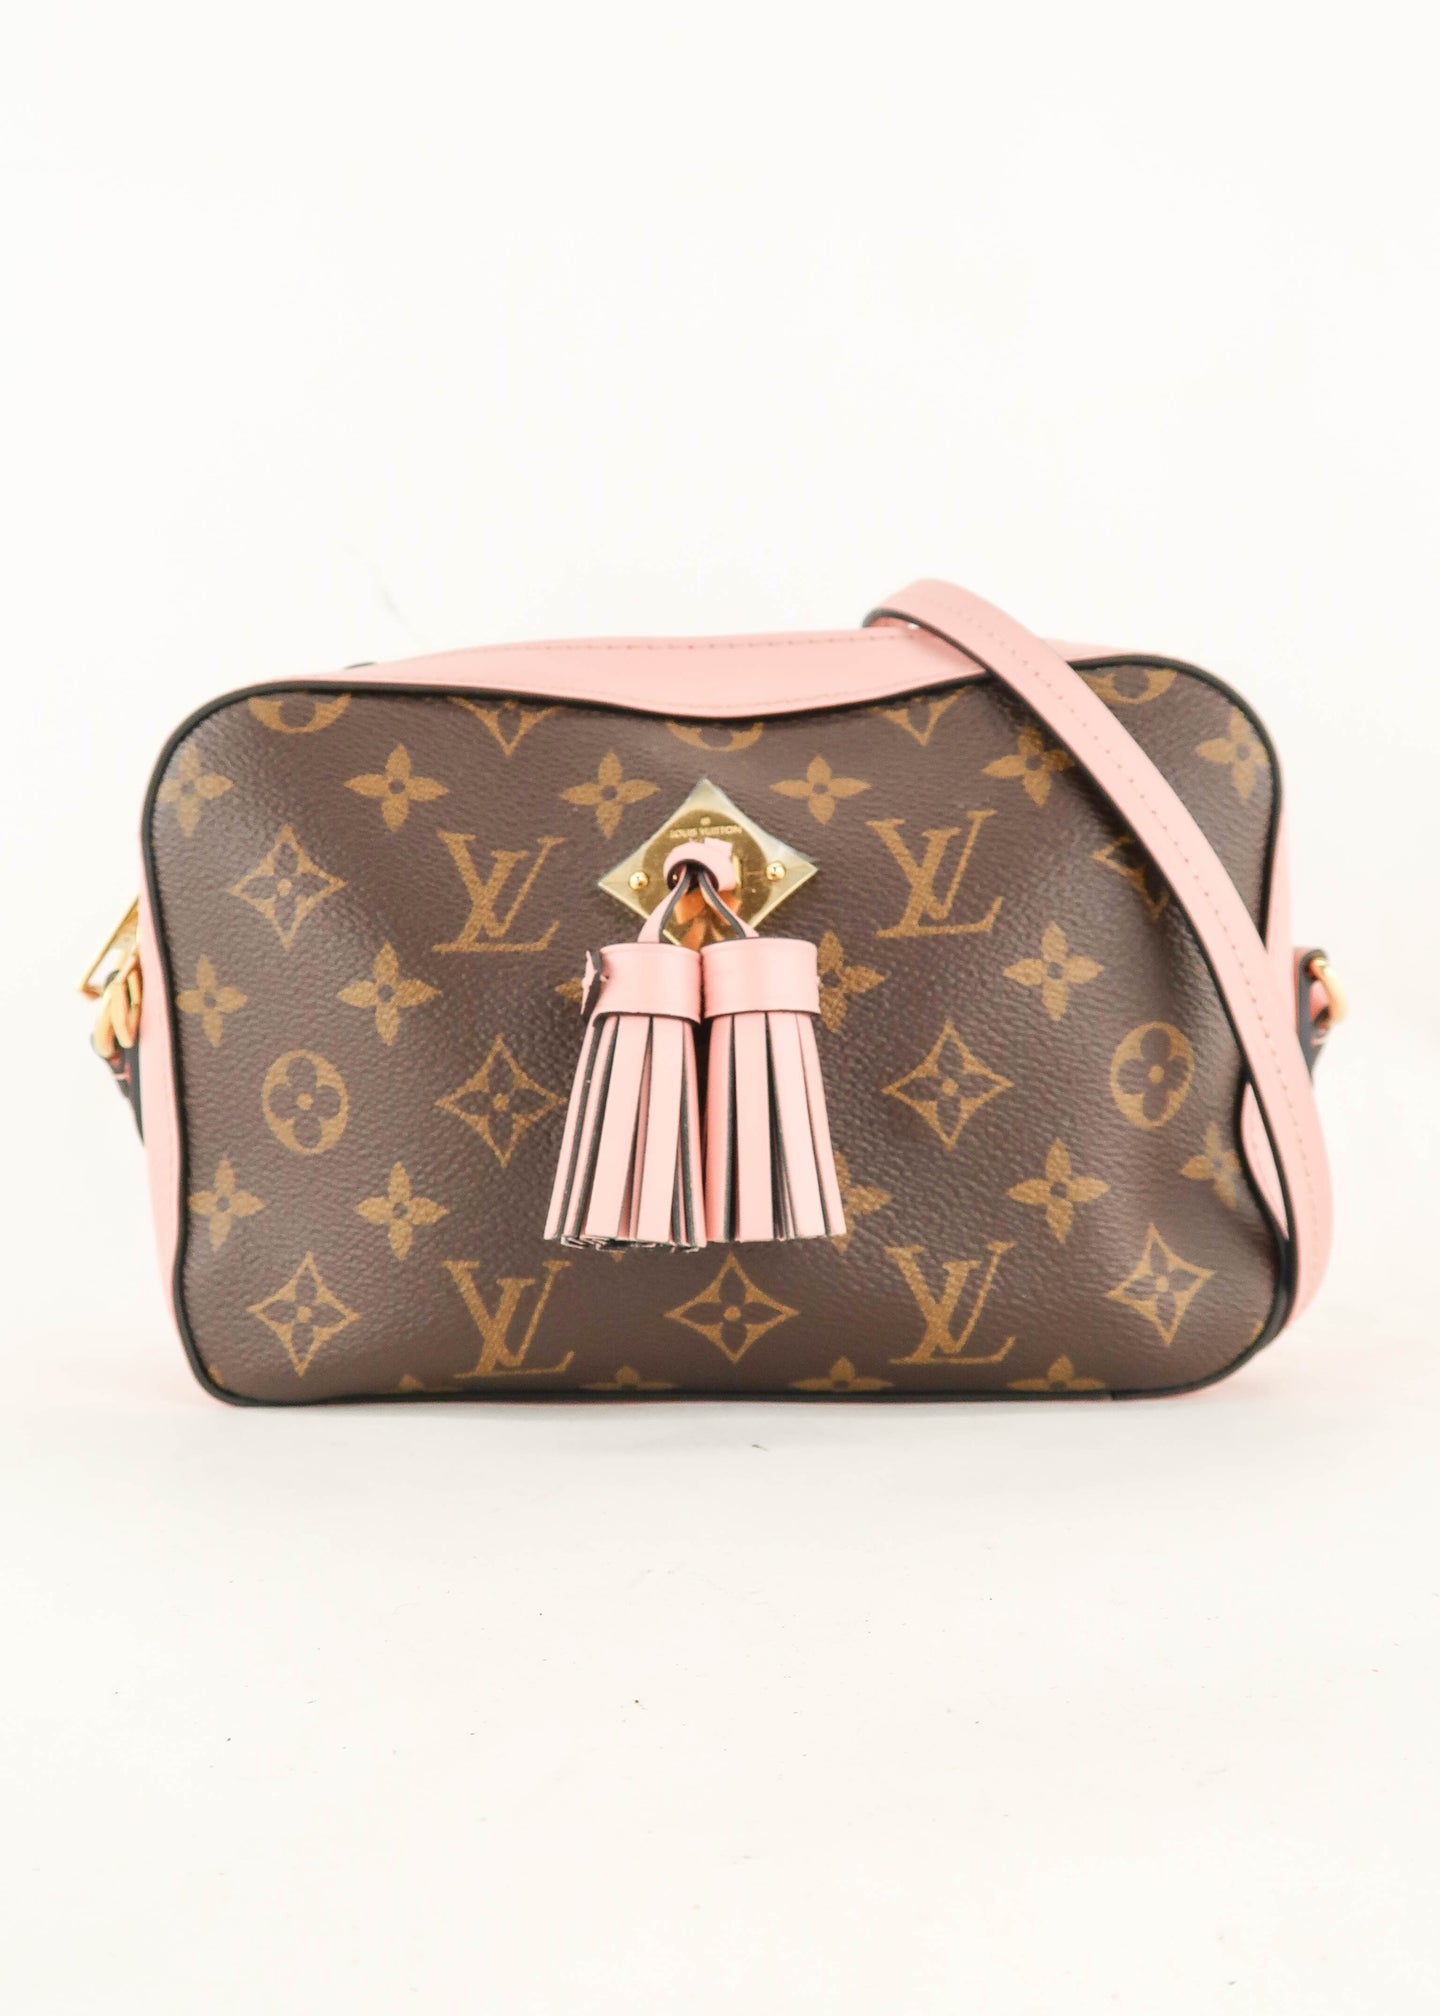 Louis Vuitton - Authenticated Metis Handbag - Cloth Camel Plain For Woman, Never Worn, with Tag